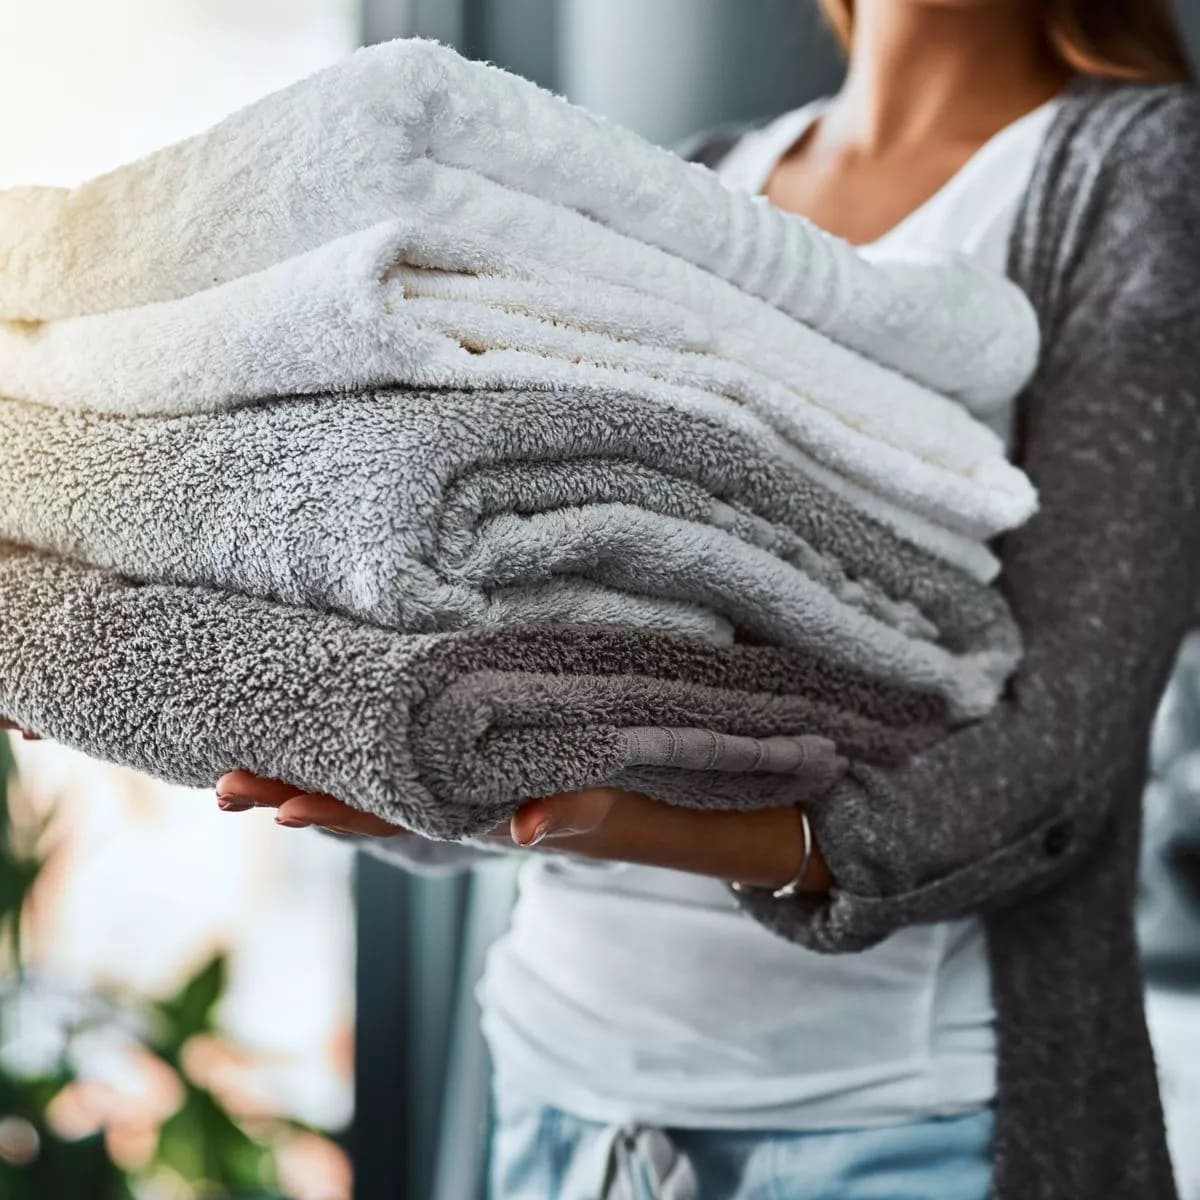 How To Use Your Towels Correctly: Experts Warn Against Some Common Mistakes